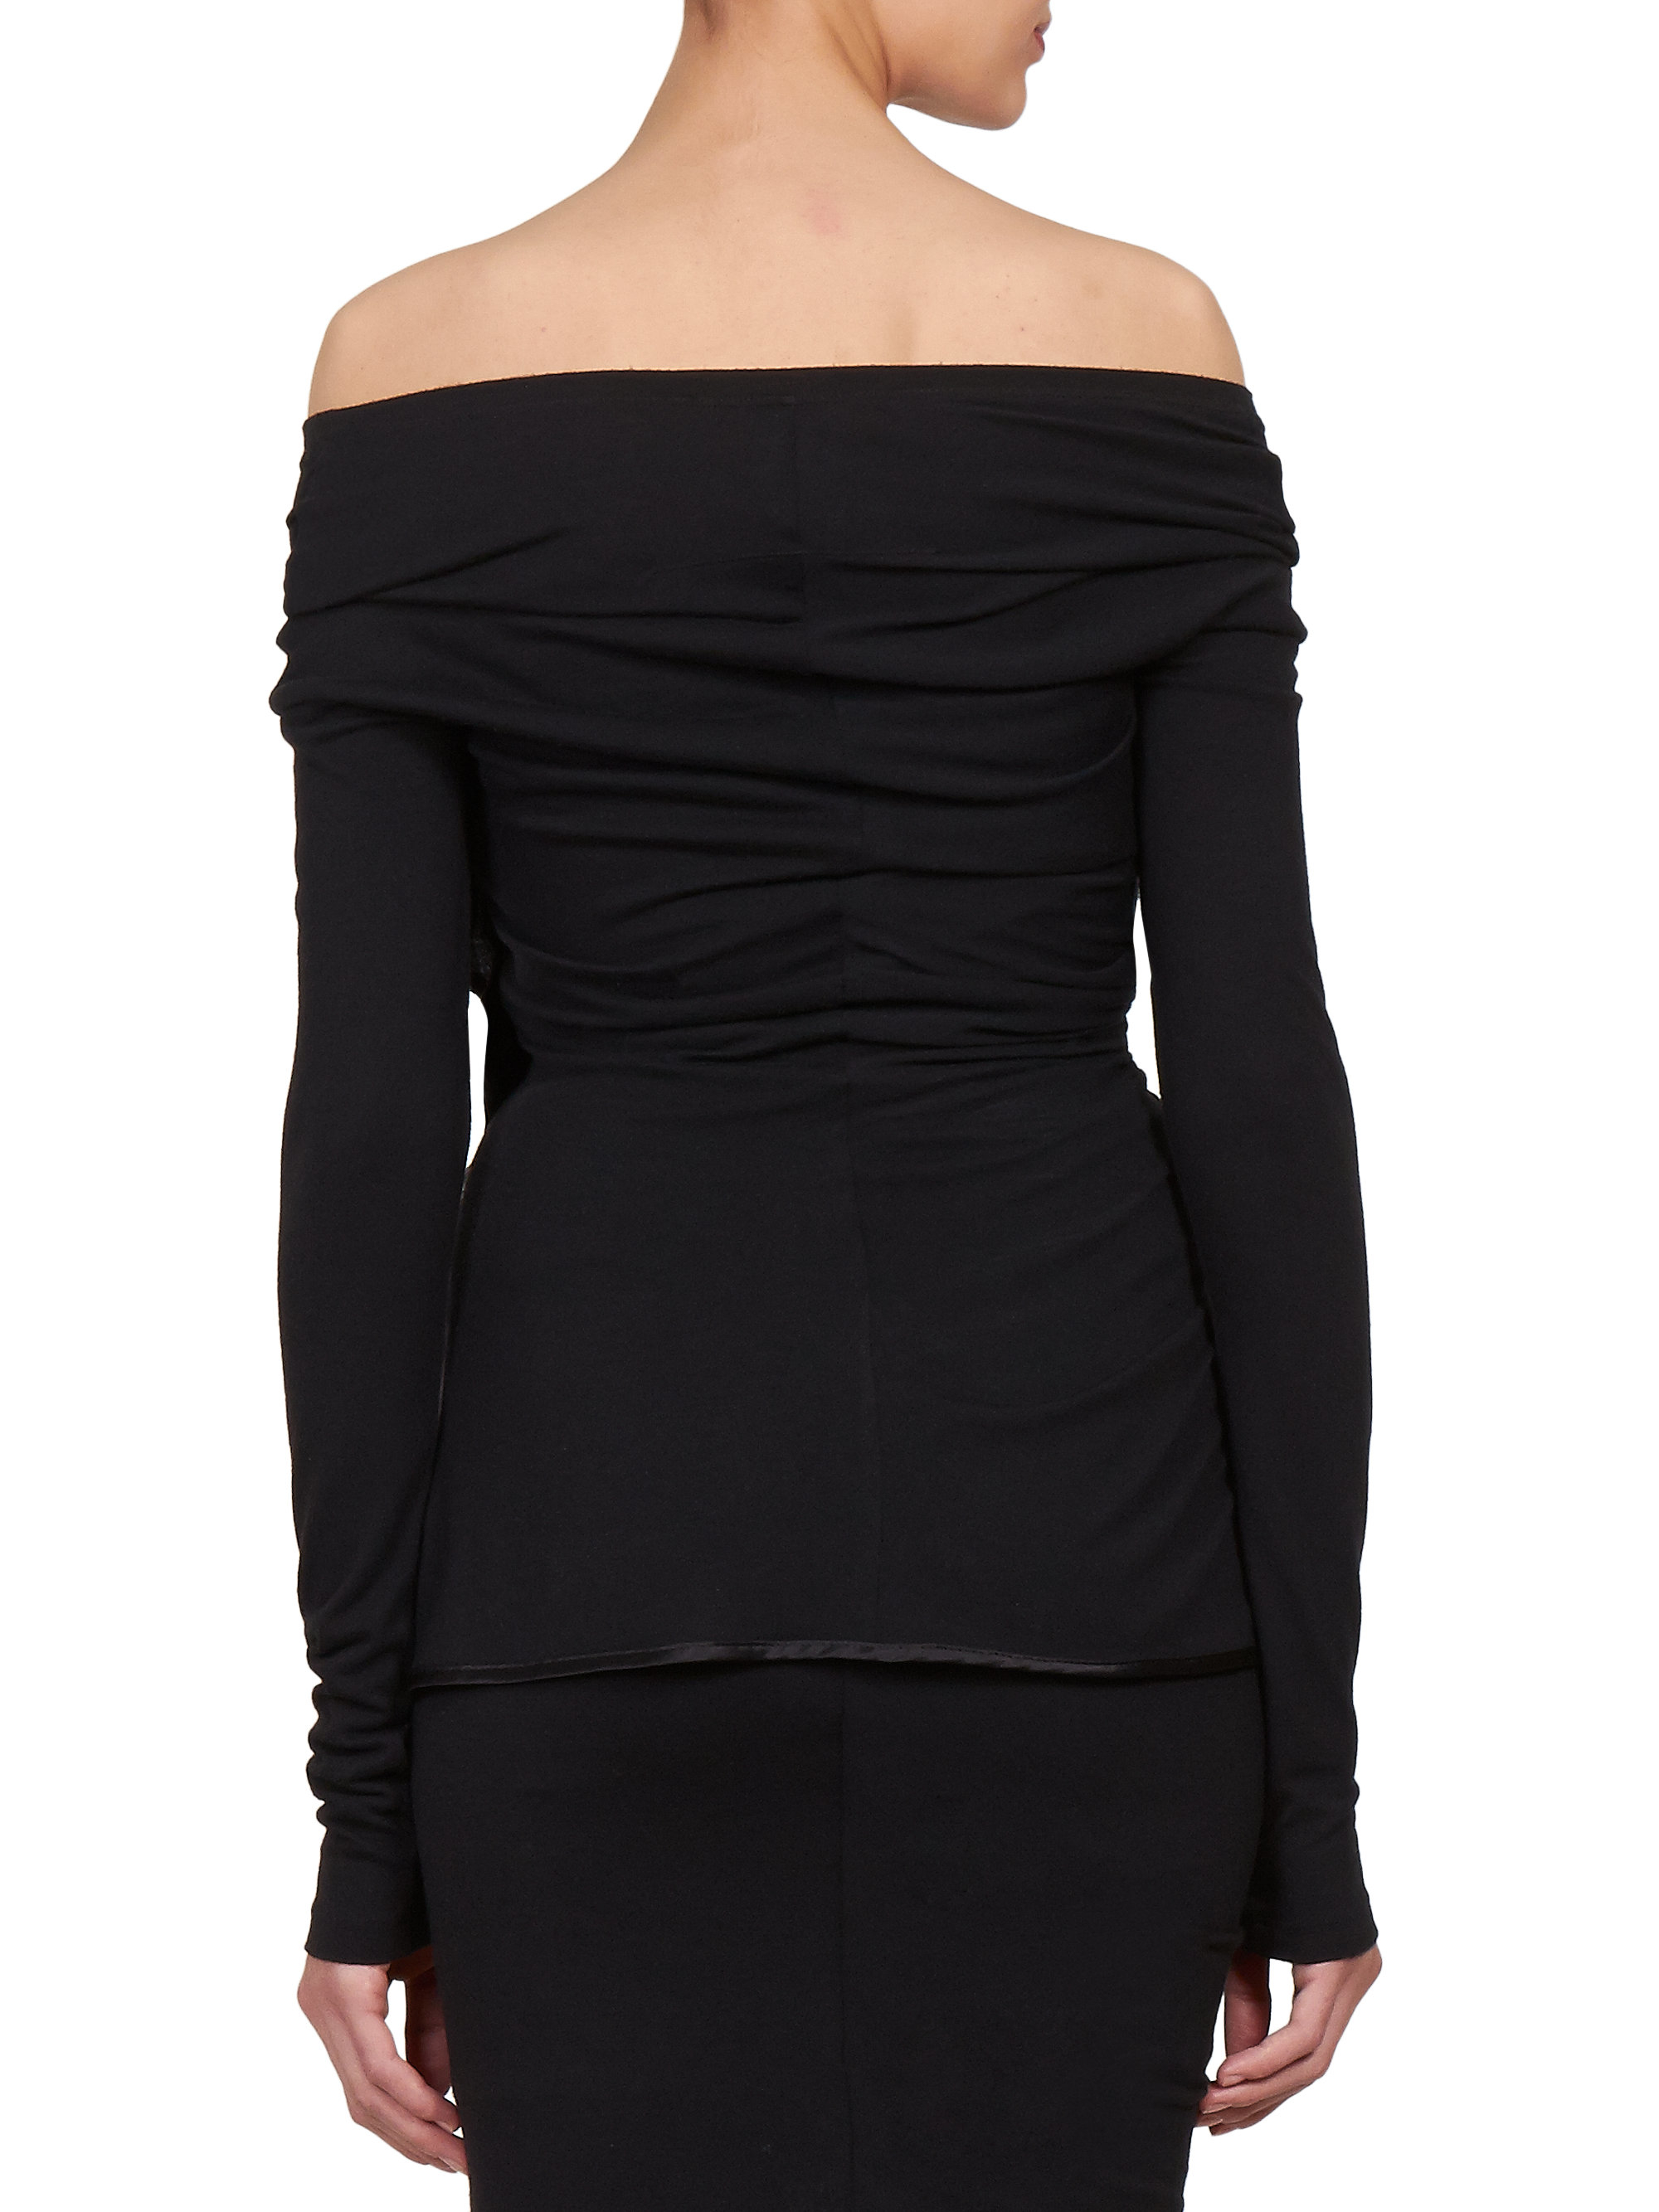 Lyst - Givenchy Jersey Off-shoulder Ruffle Top in Black